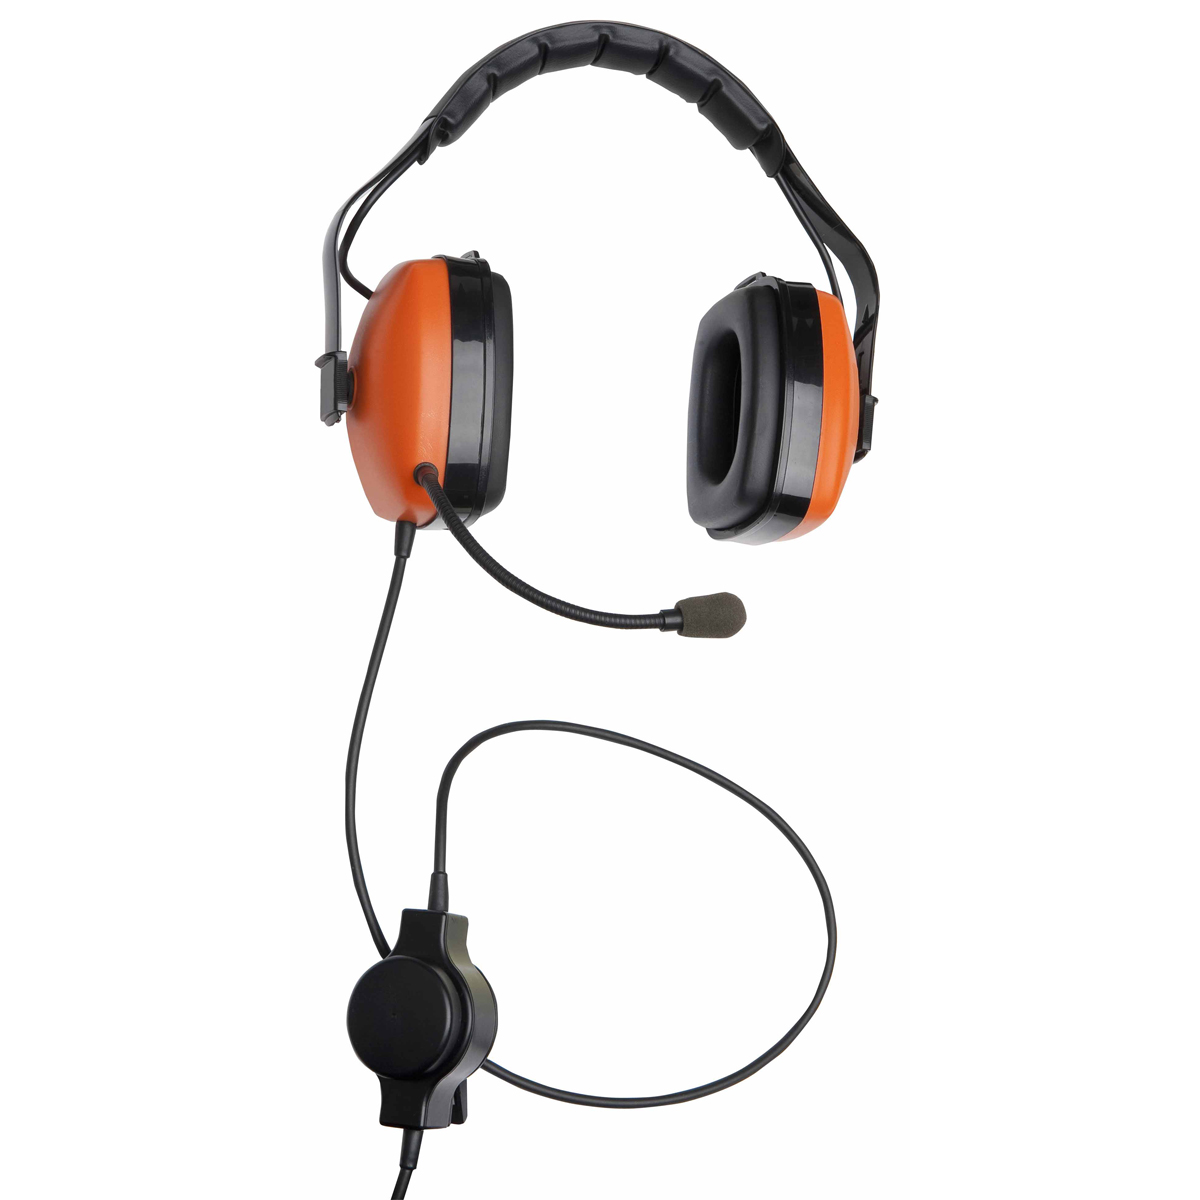 Headset for Outdoor Intercom Station for use in noisy areas